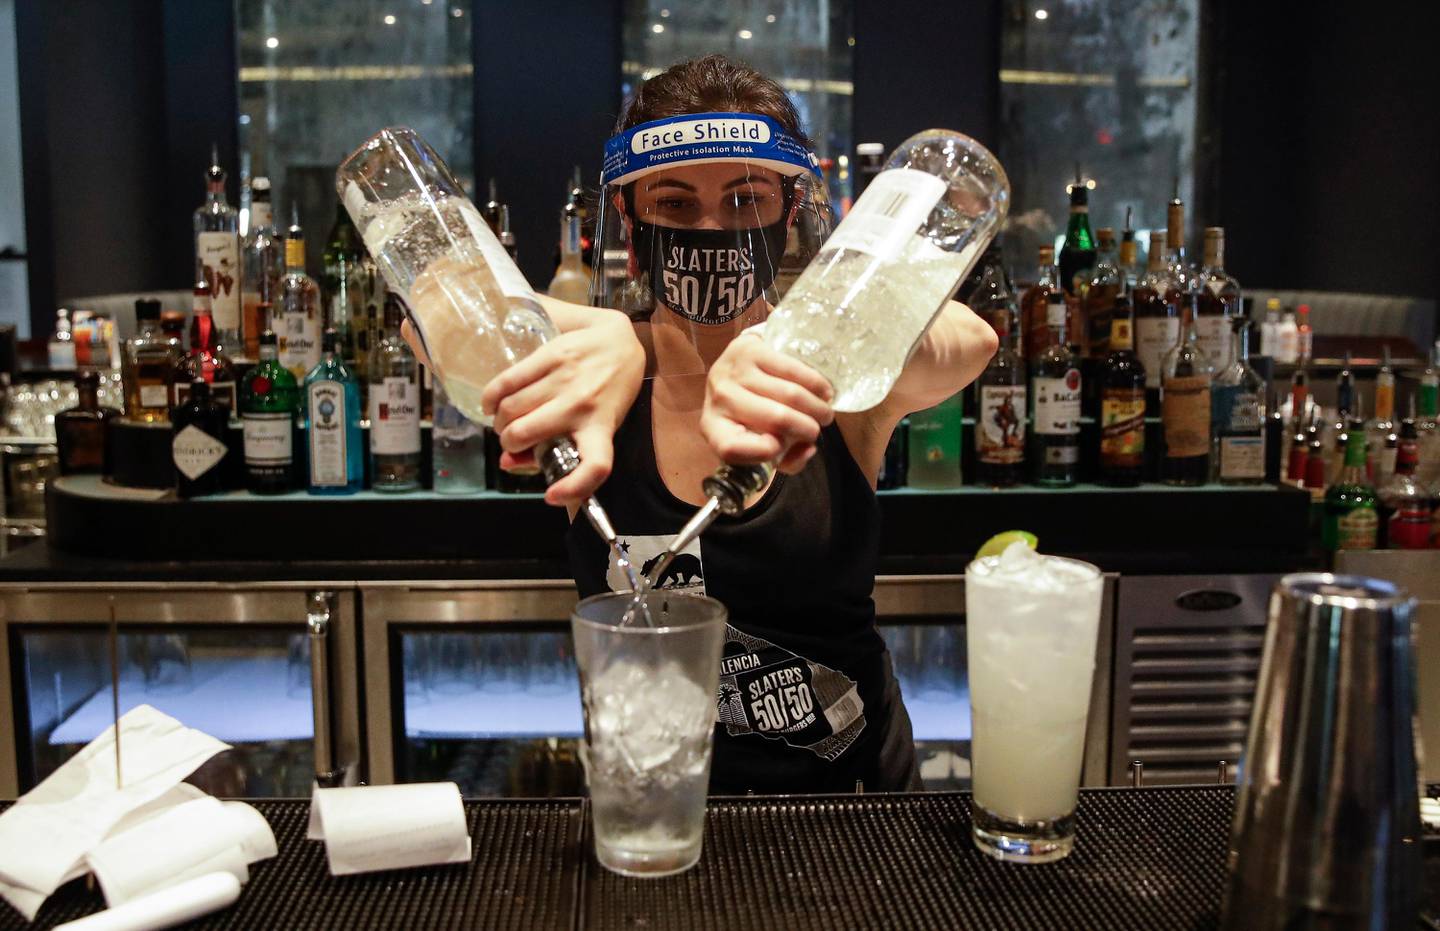 FILE - In this July 1, 2020, file photo, a bartender mixes a drink while wearing a mask and face shield at Slater's 50/50 in Santa Clarita, Calif. California Gov. Gavin Newsom on Monday, July 13, 2020, extended the closure of bars and indoor dining statewide and ordered gyms, churches and hair salons closed in most places as coronavirus cases keep rising in the nation's most populated state. (AP Photo/Marcio Jose Sanchez, File)